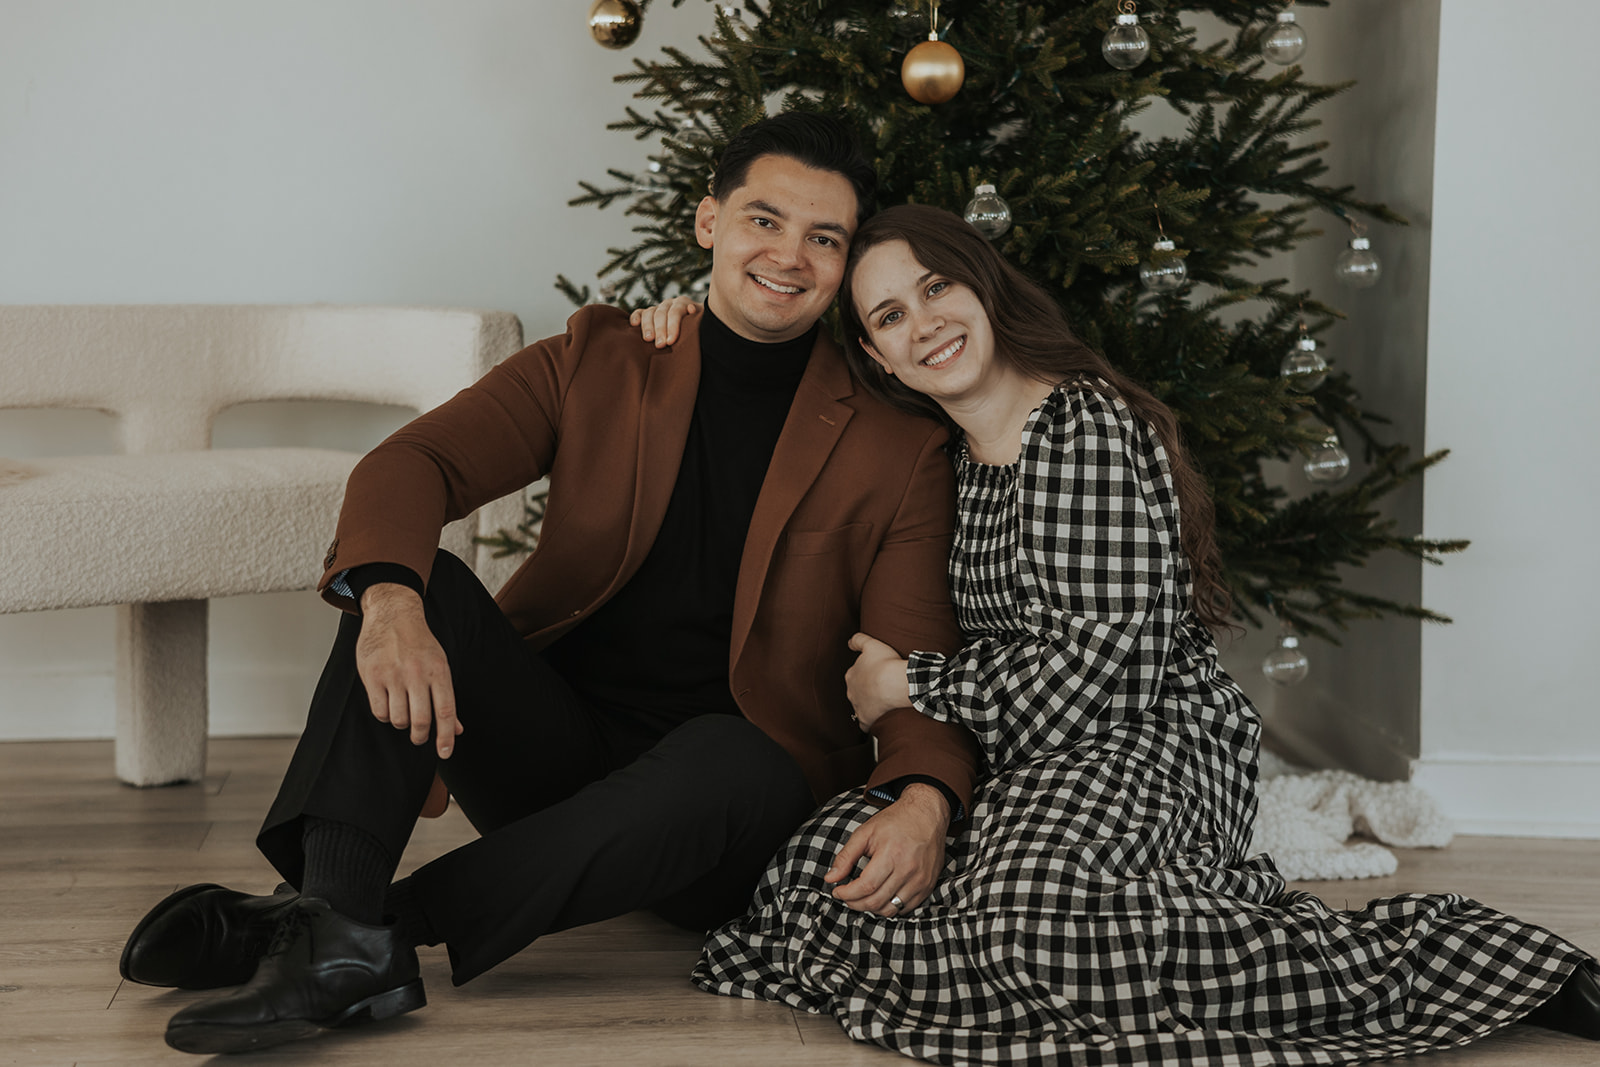 Stunning couple pose in front of a Christmas tree during their Christmas photoshoot